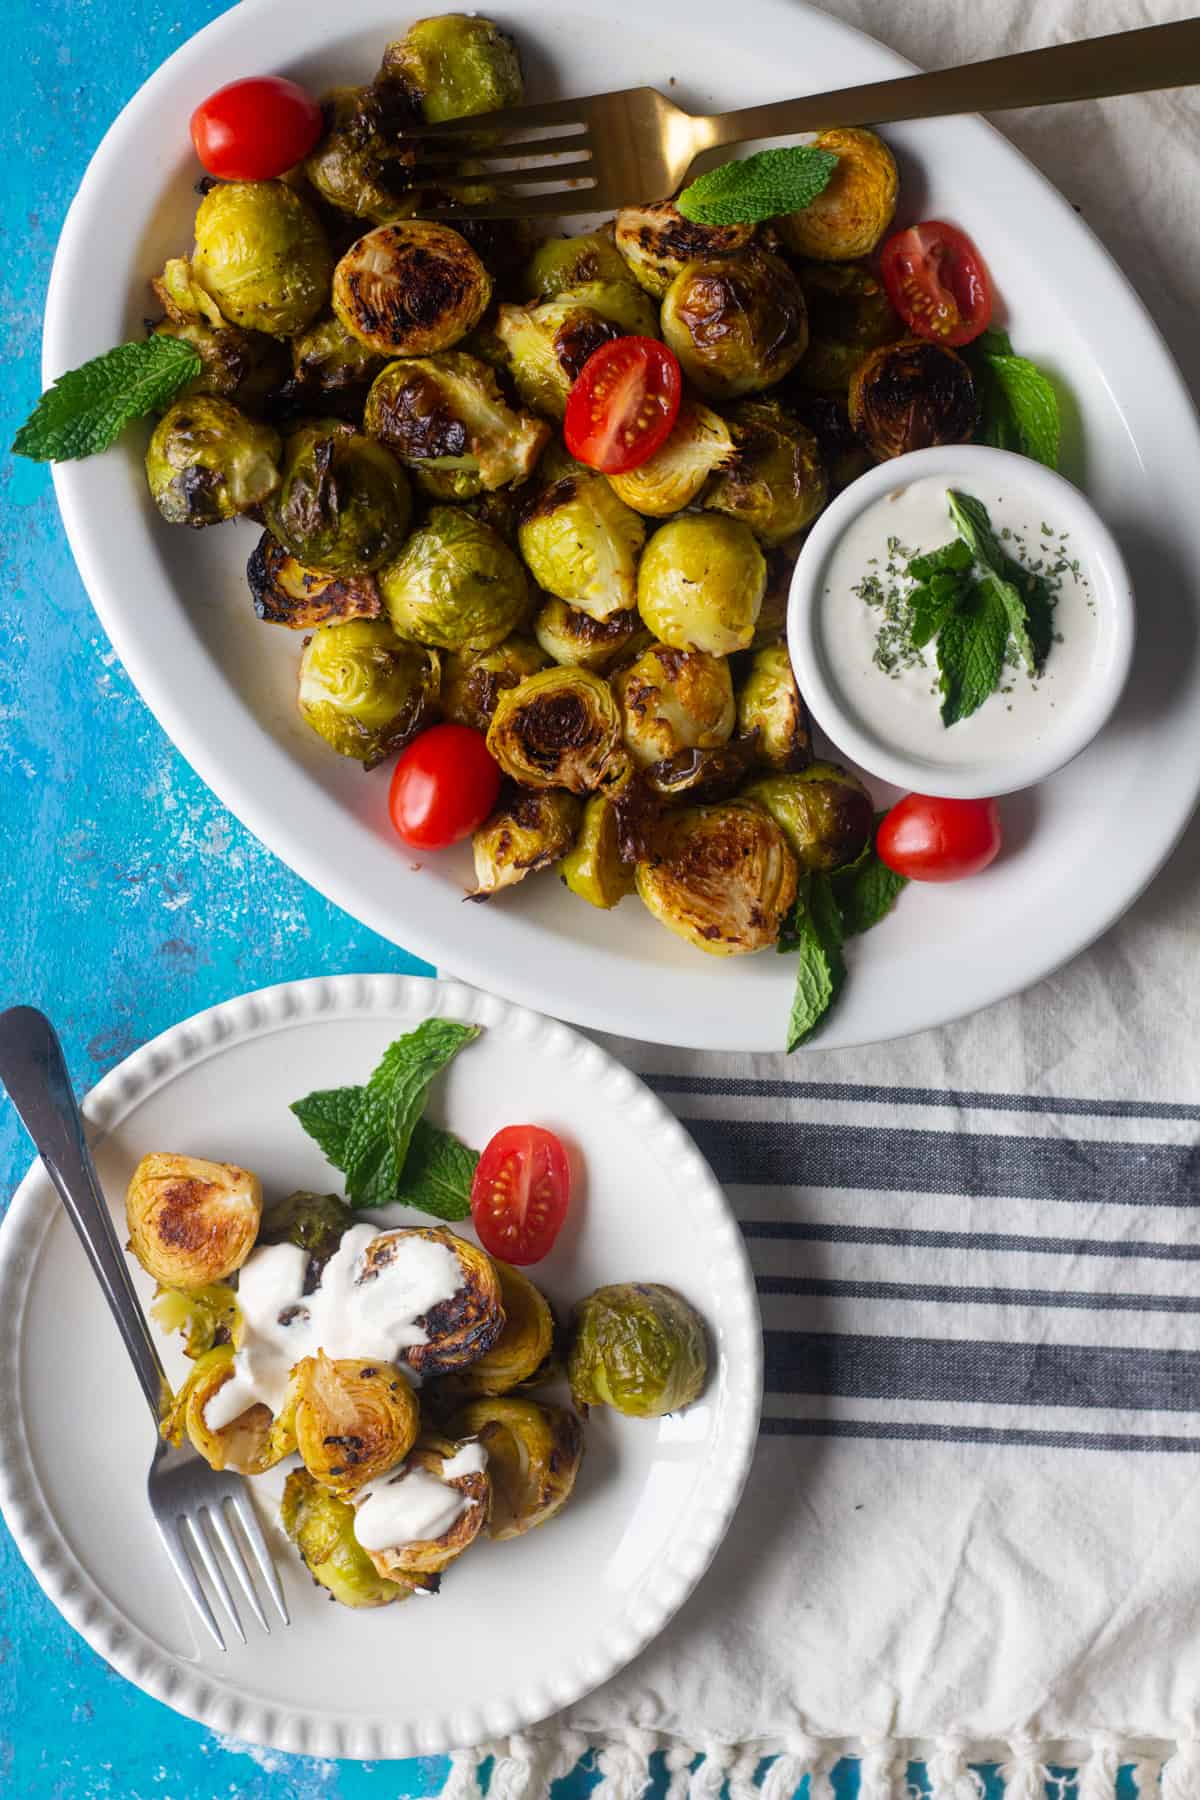 Oven roasted brussel sprouts are easy and ready in 20 minutes. Crispy brussel sprouts roasted in the oven with lemon and garlic make a great side dish. 
